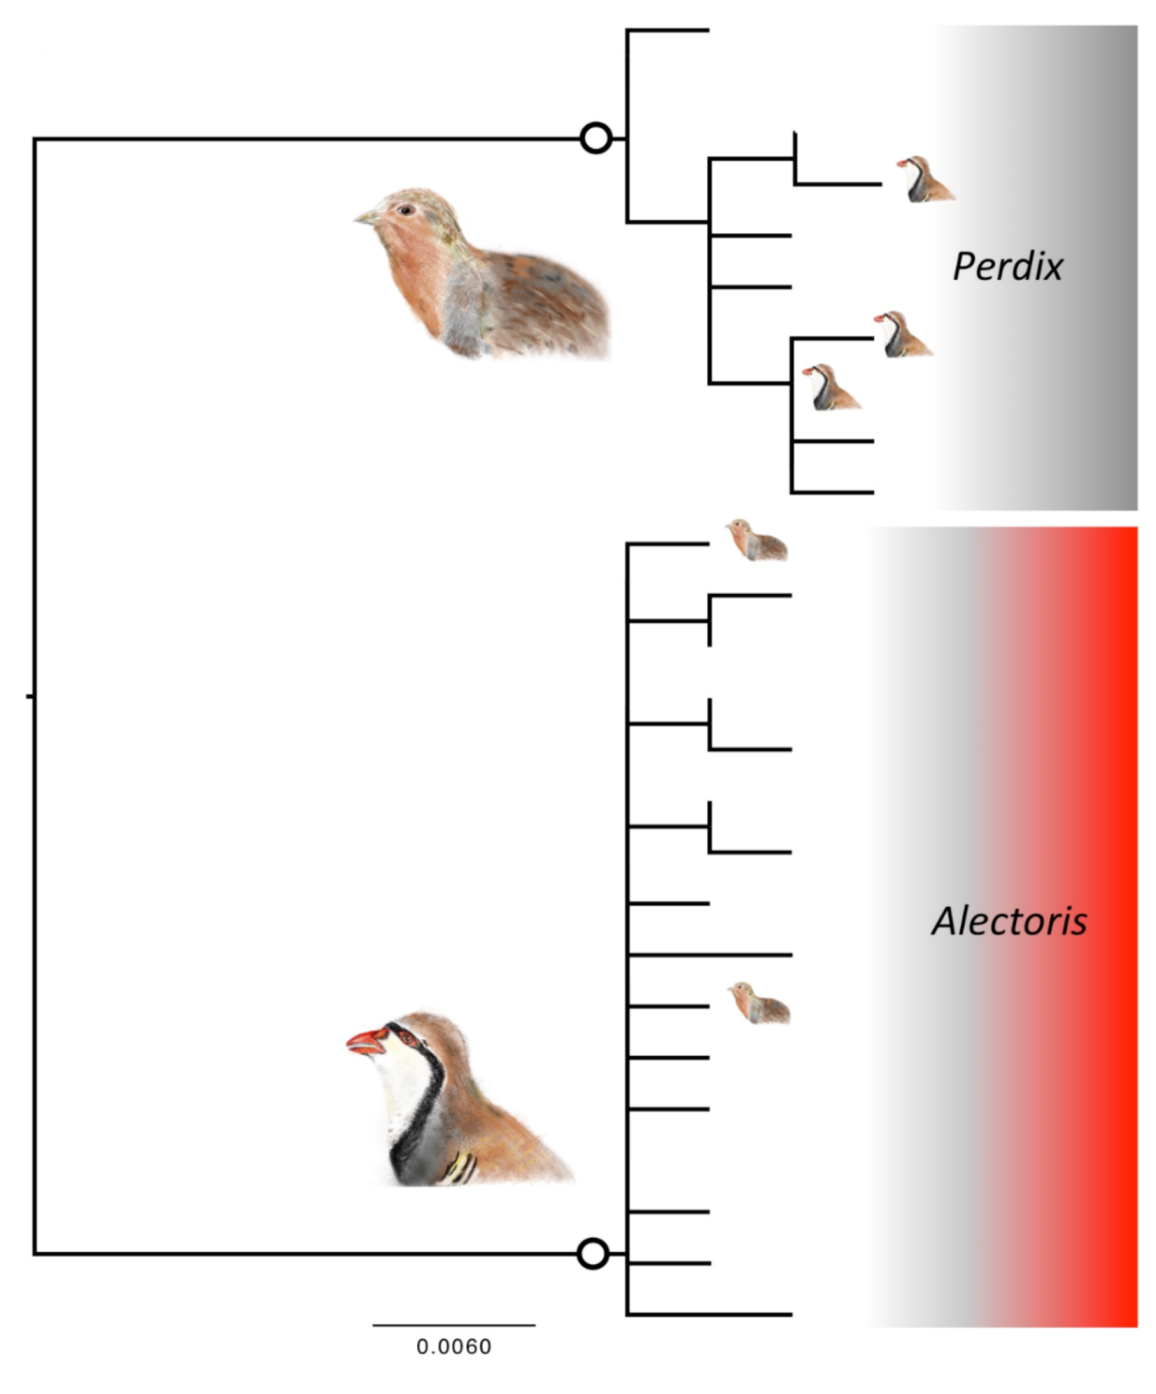 Animals | Free Full-Text | Mismatches between Morphology and DNA in Italian  Partridges May Not Be Explained Only by Recent Artificial Release of  Farm-Reared Birds | HTML